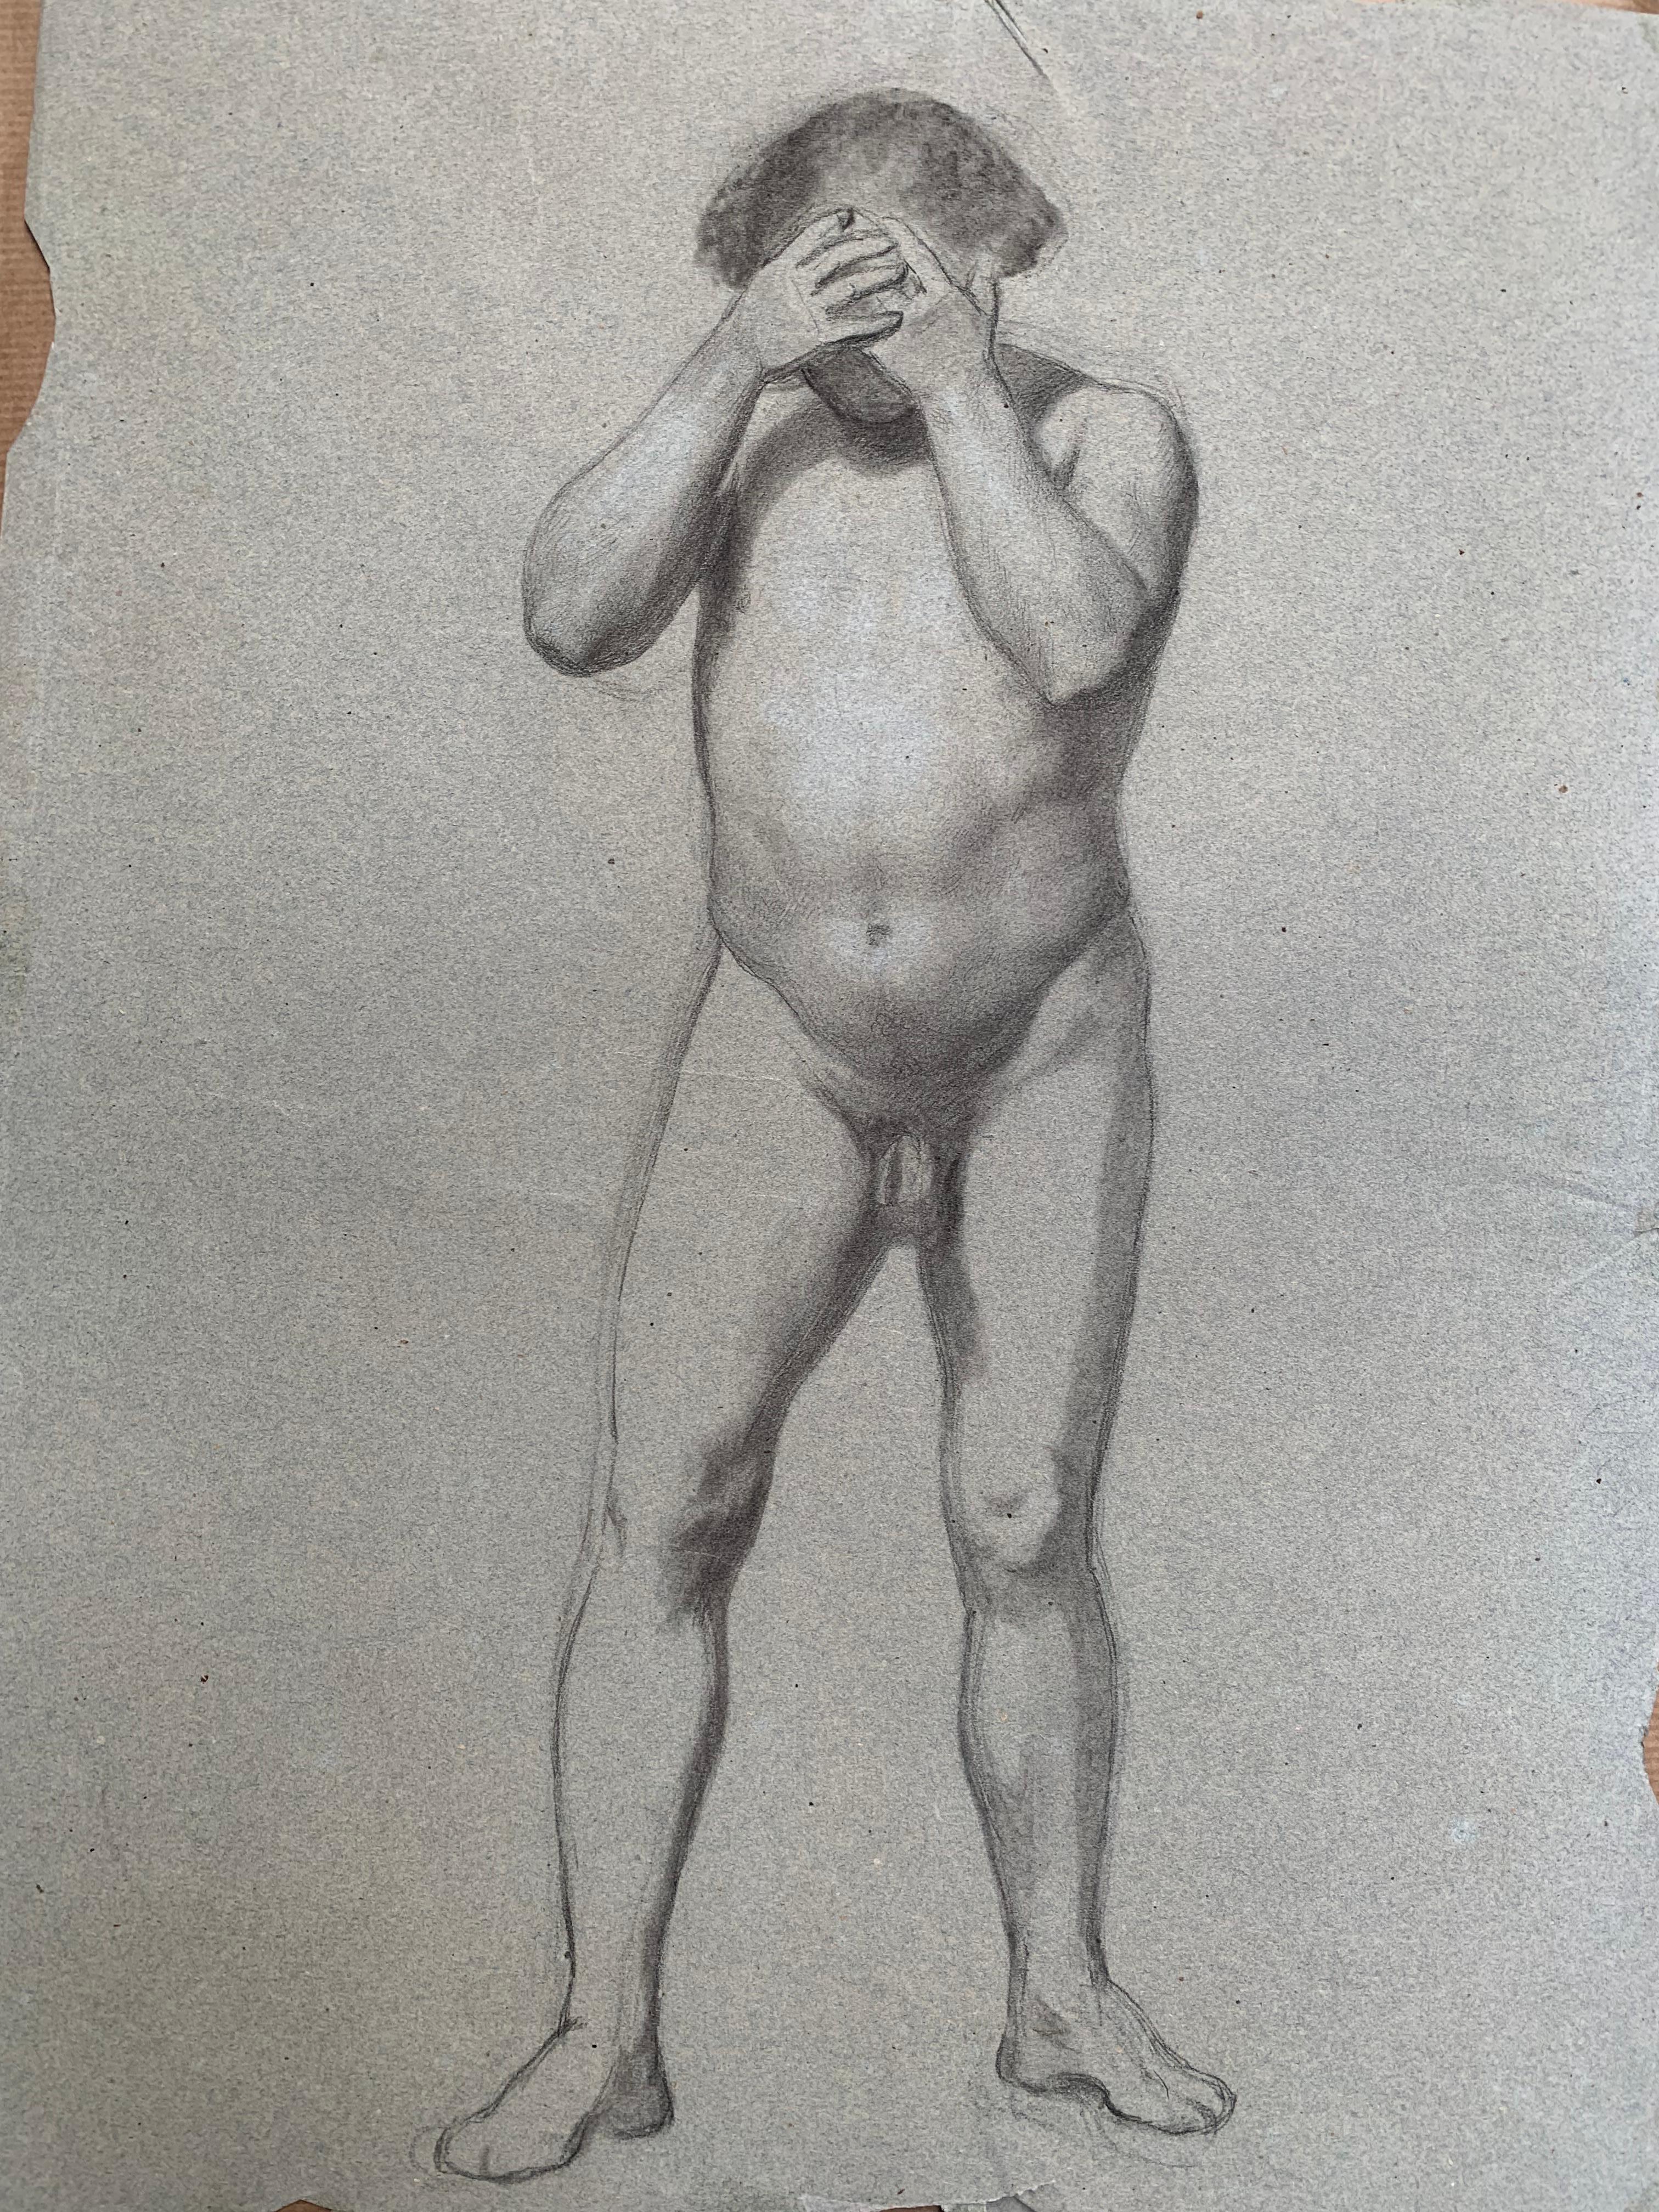 Preparatory anatomical study for the figure of a man with hands on his face. For Sale 5